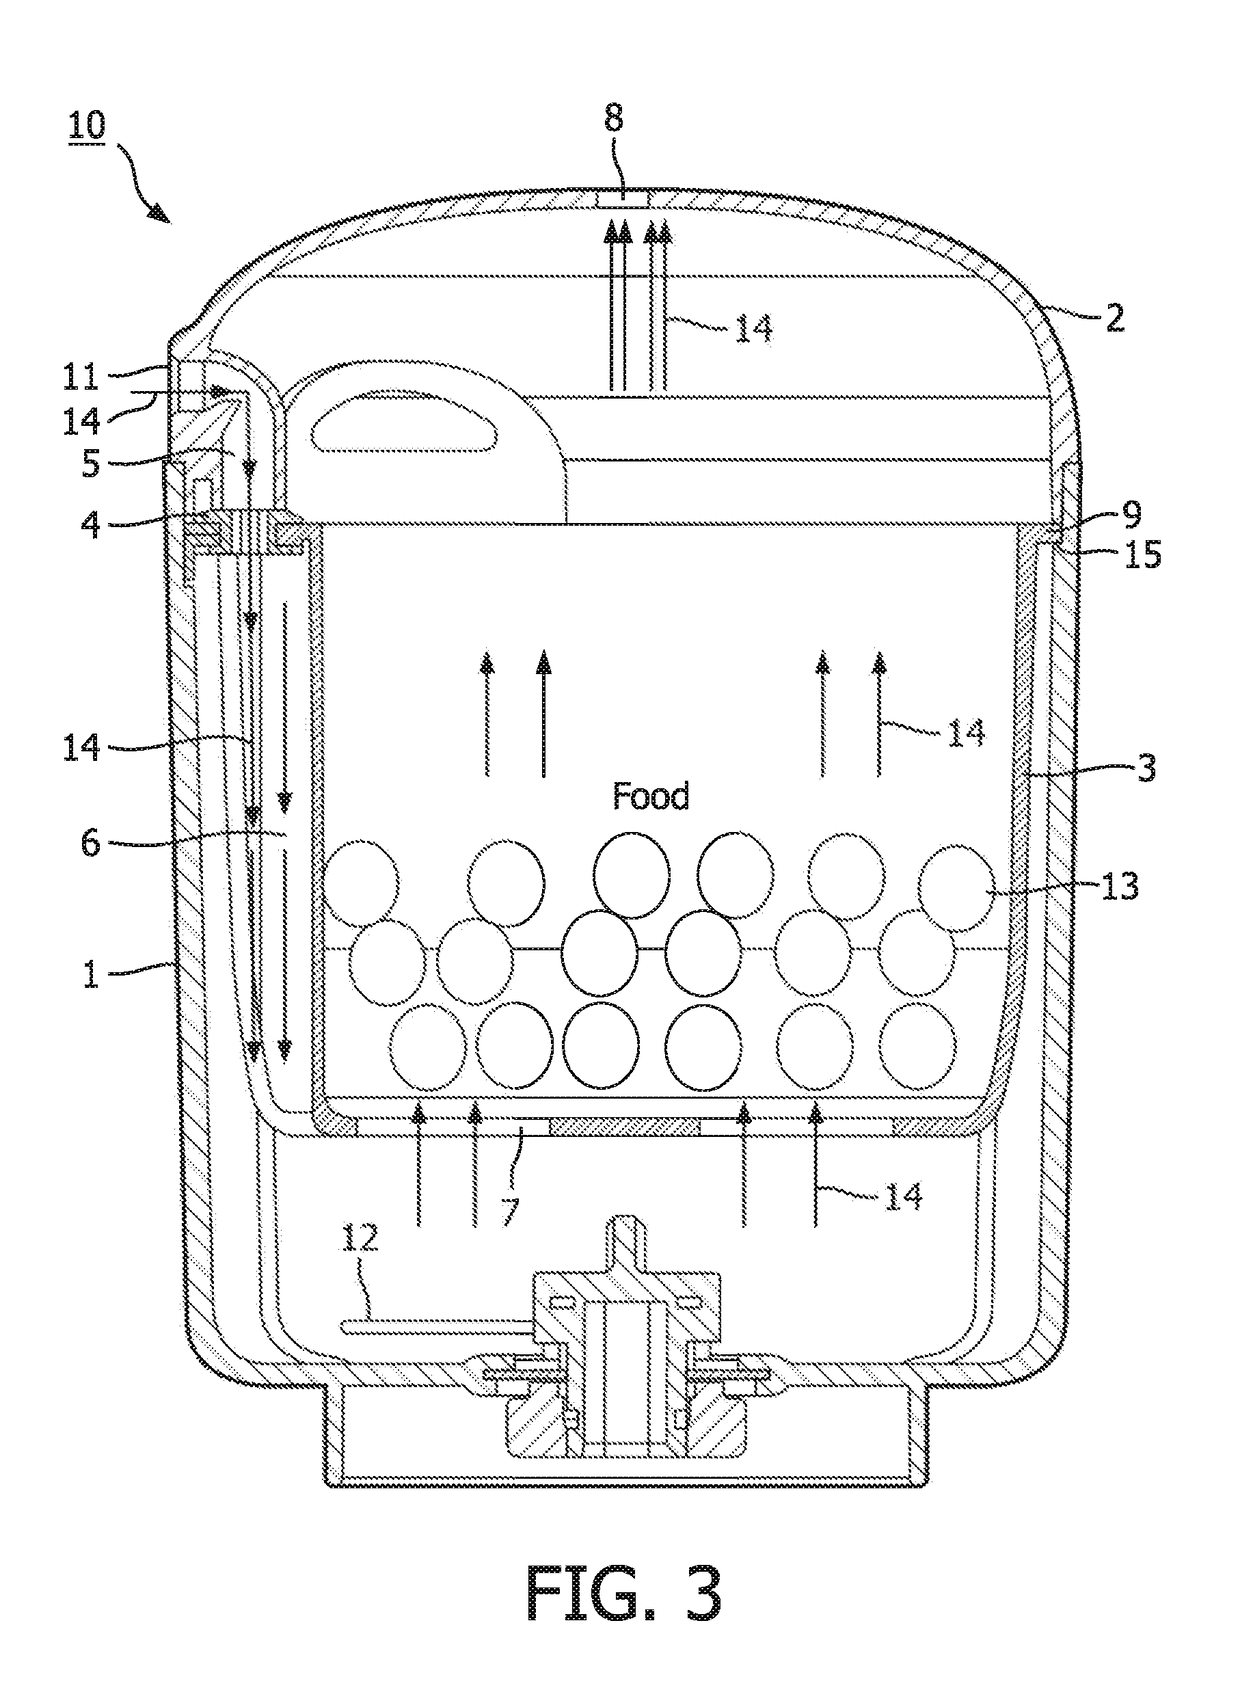 Food processor with improved steam channel structure